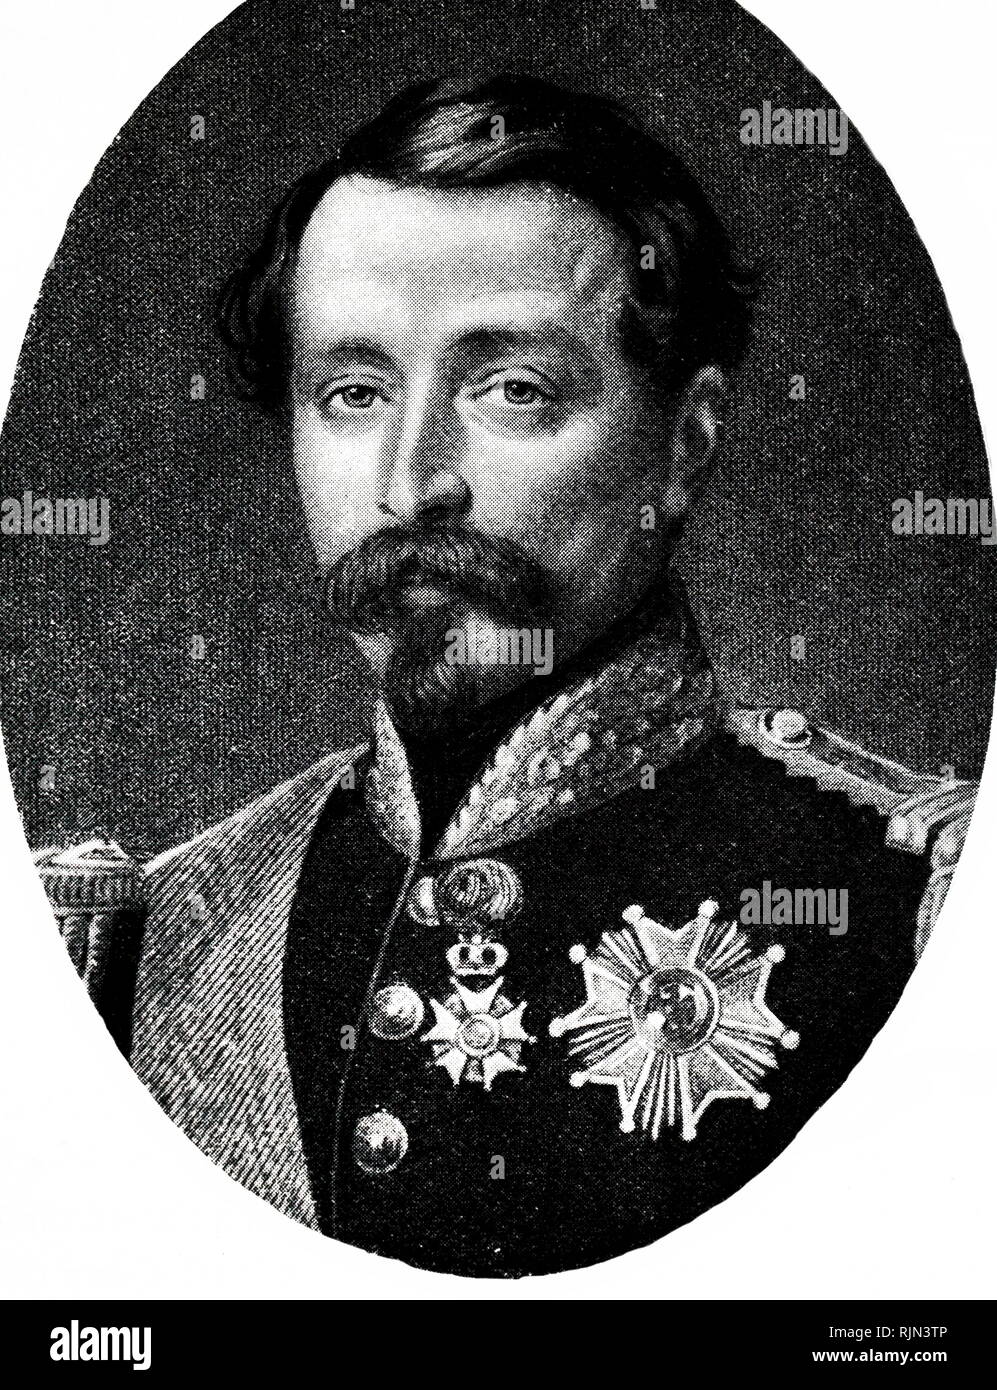 Illustration showing Napoleon III (1808 – 1873) Emperor of the French from 1852 to 1870 and, as Louis-Napoleon Bonaparte, the President of France from 1848 to 1852. He was the only president of the French Second Republic and the founder of the Second French Empire. Stock Photo